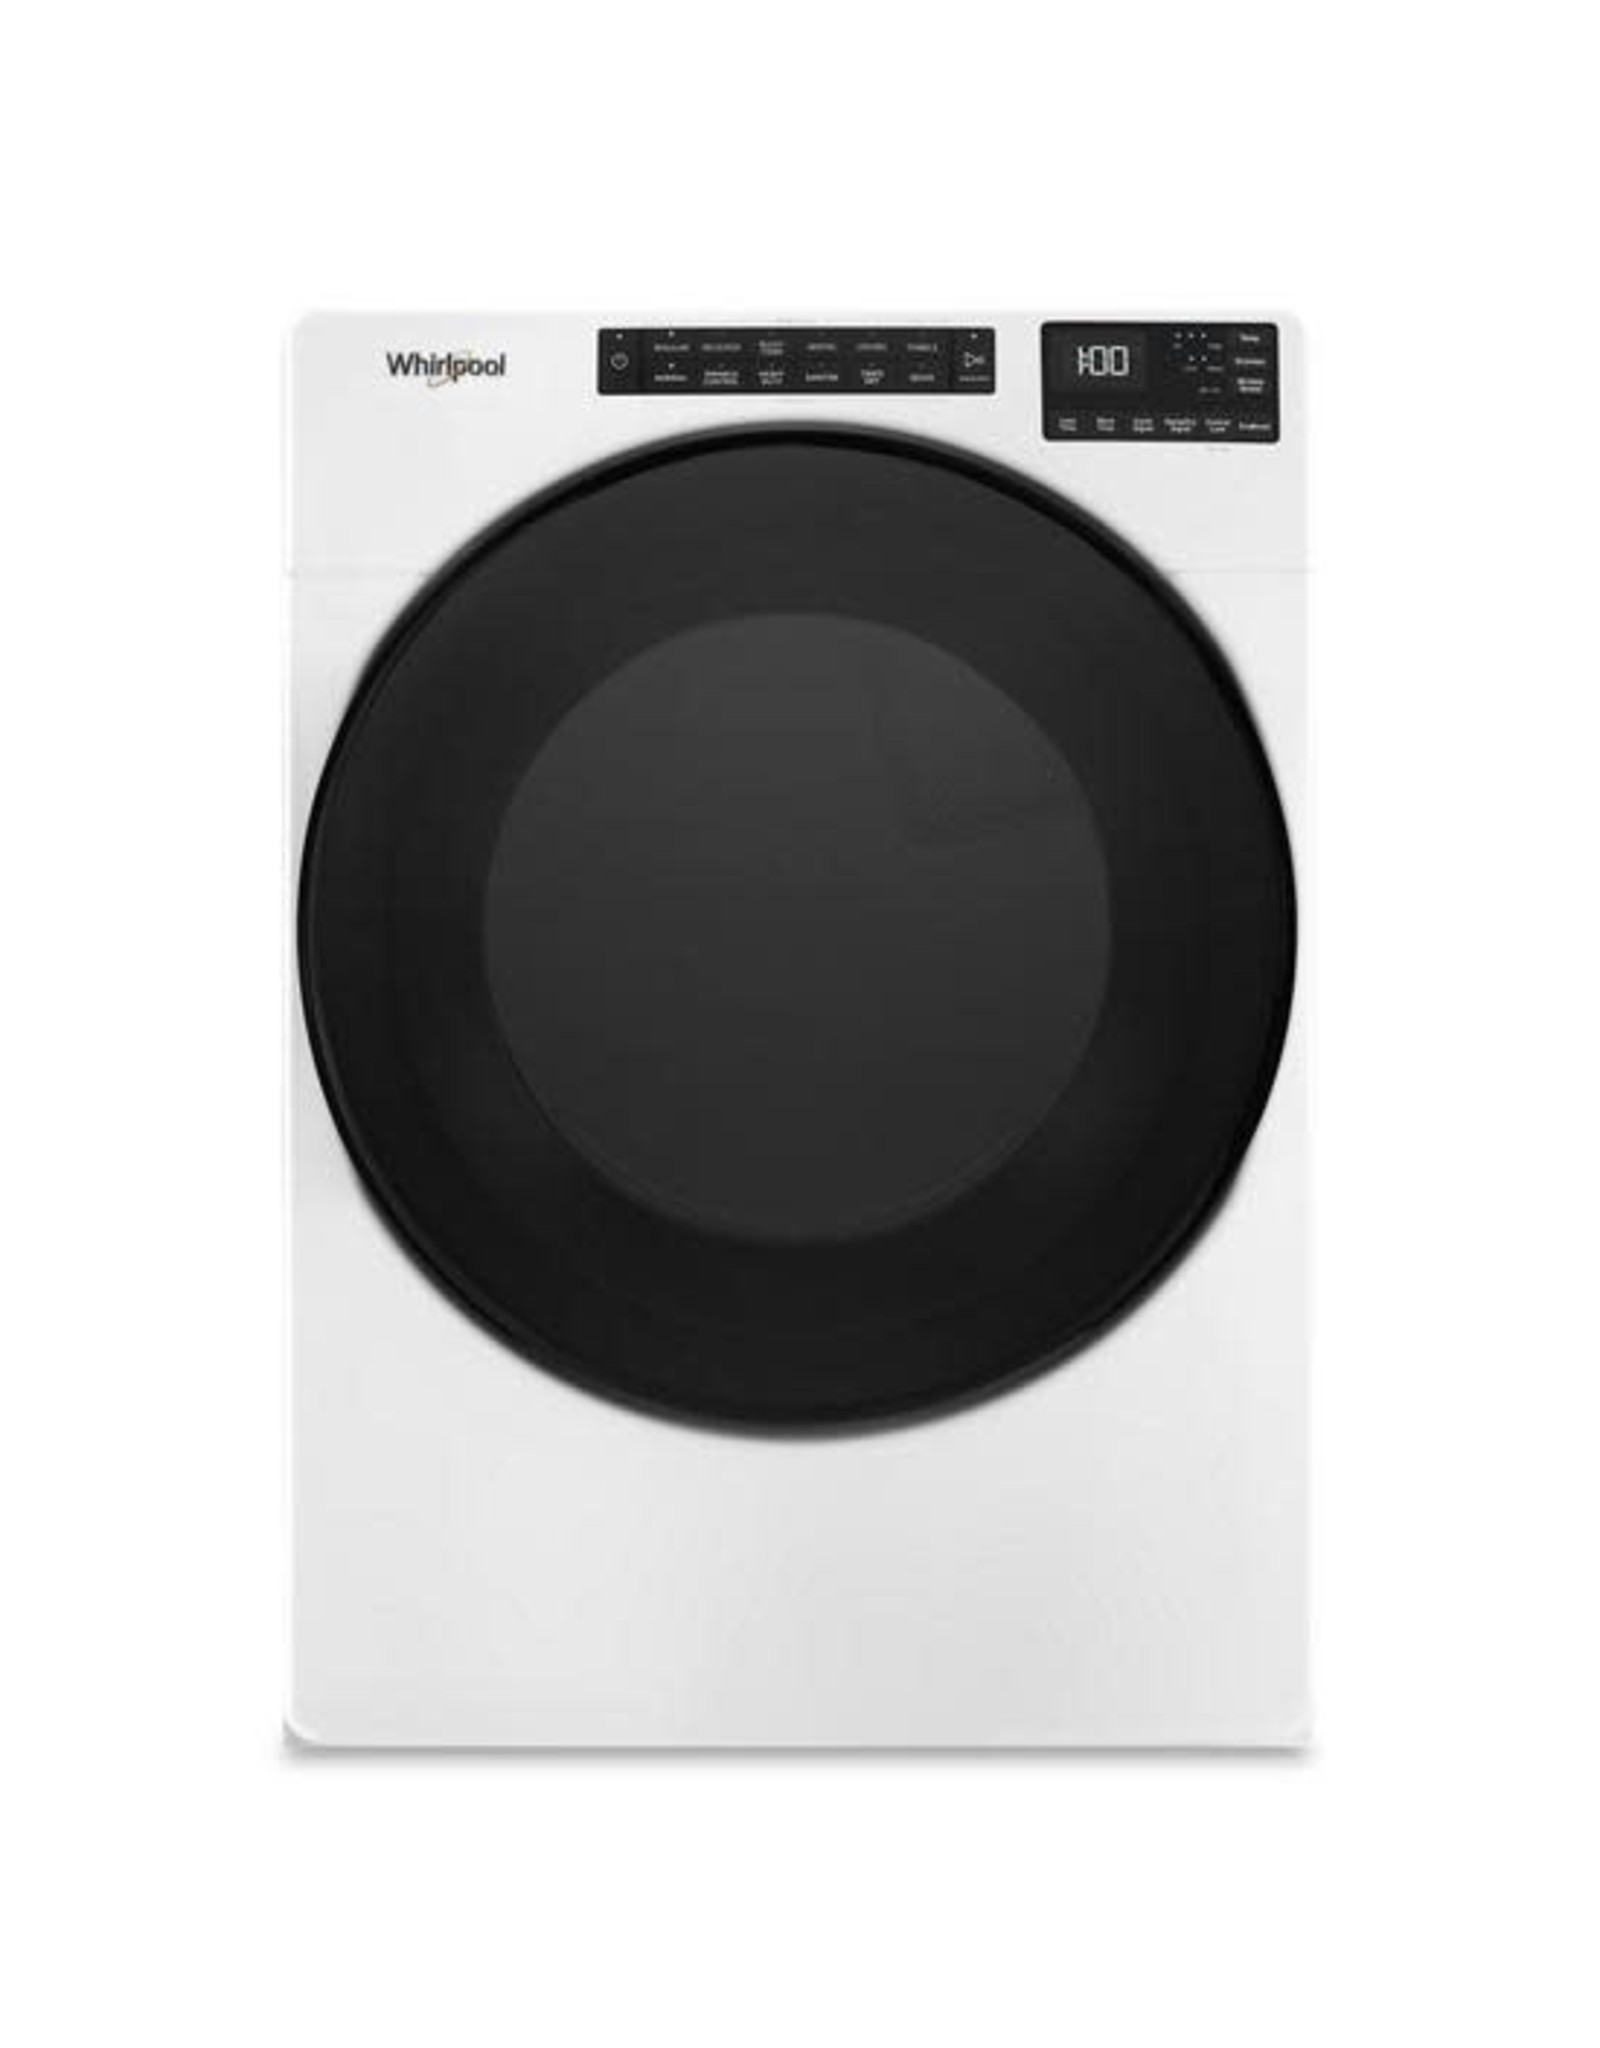 WHIRLPOOL WED5605MW 7.4 cu. ft. Vented Electric Dryer in White